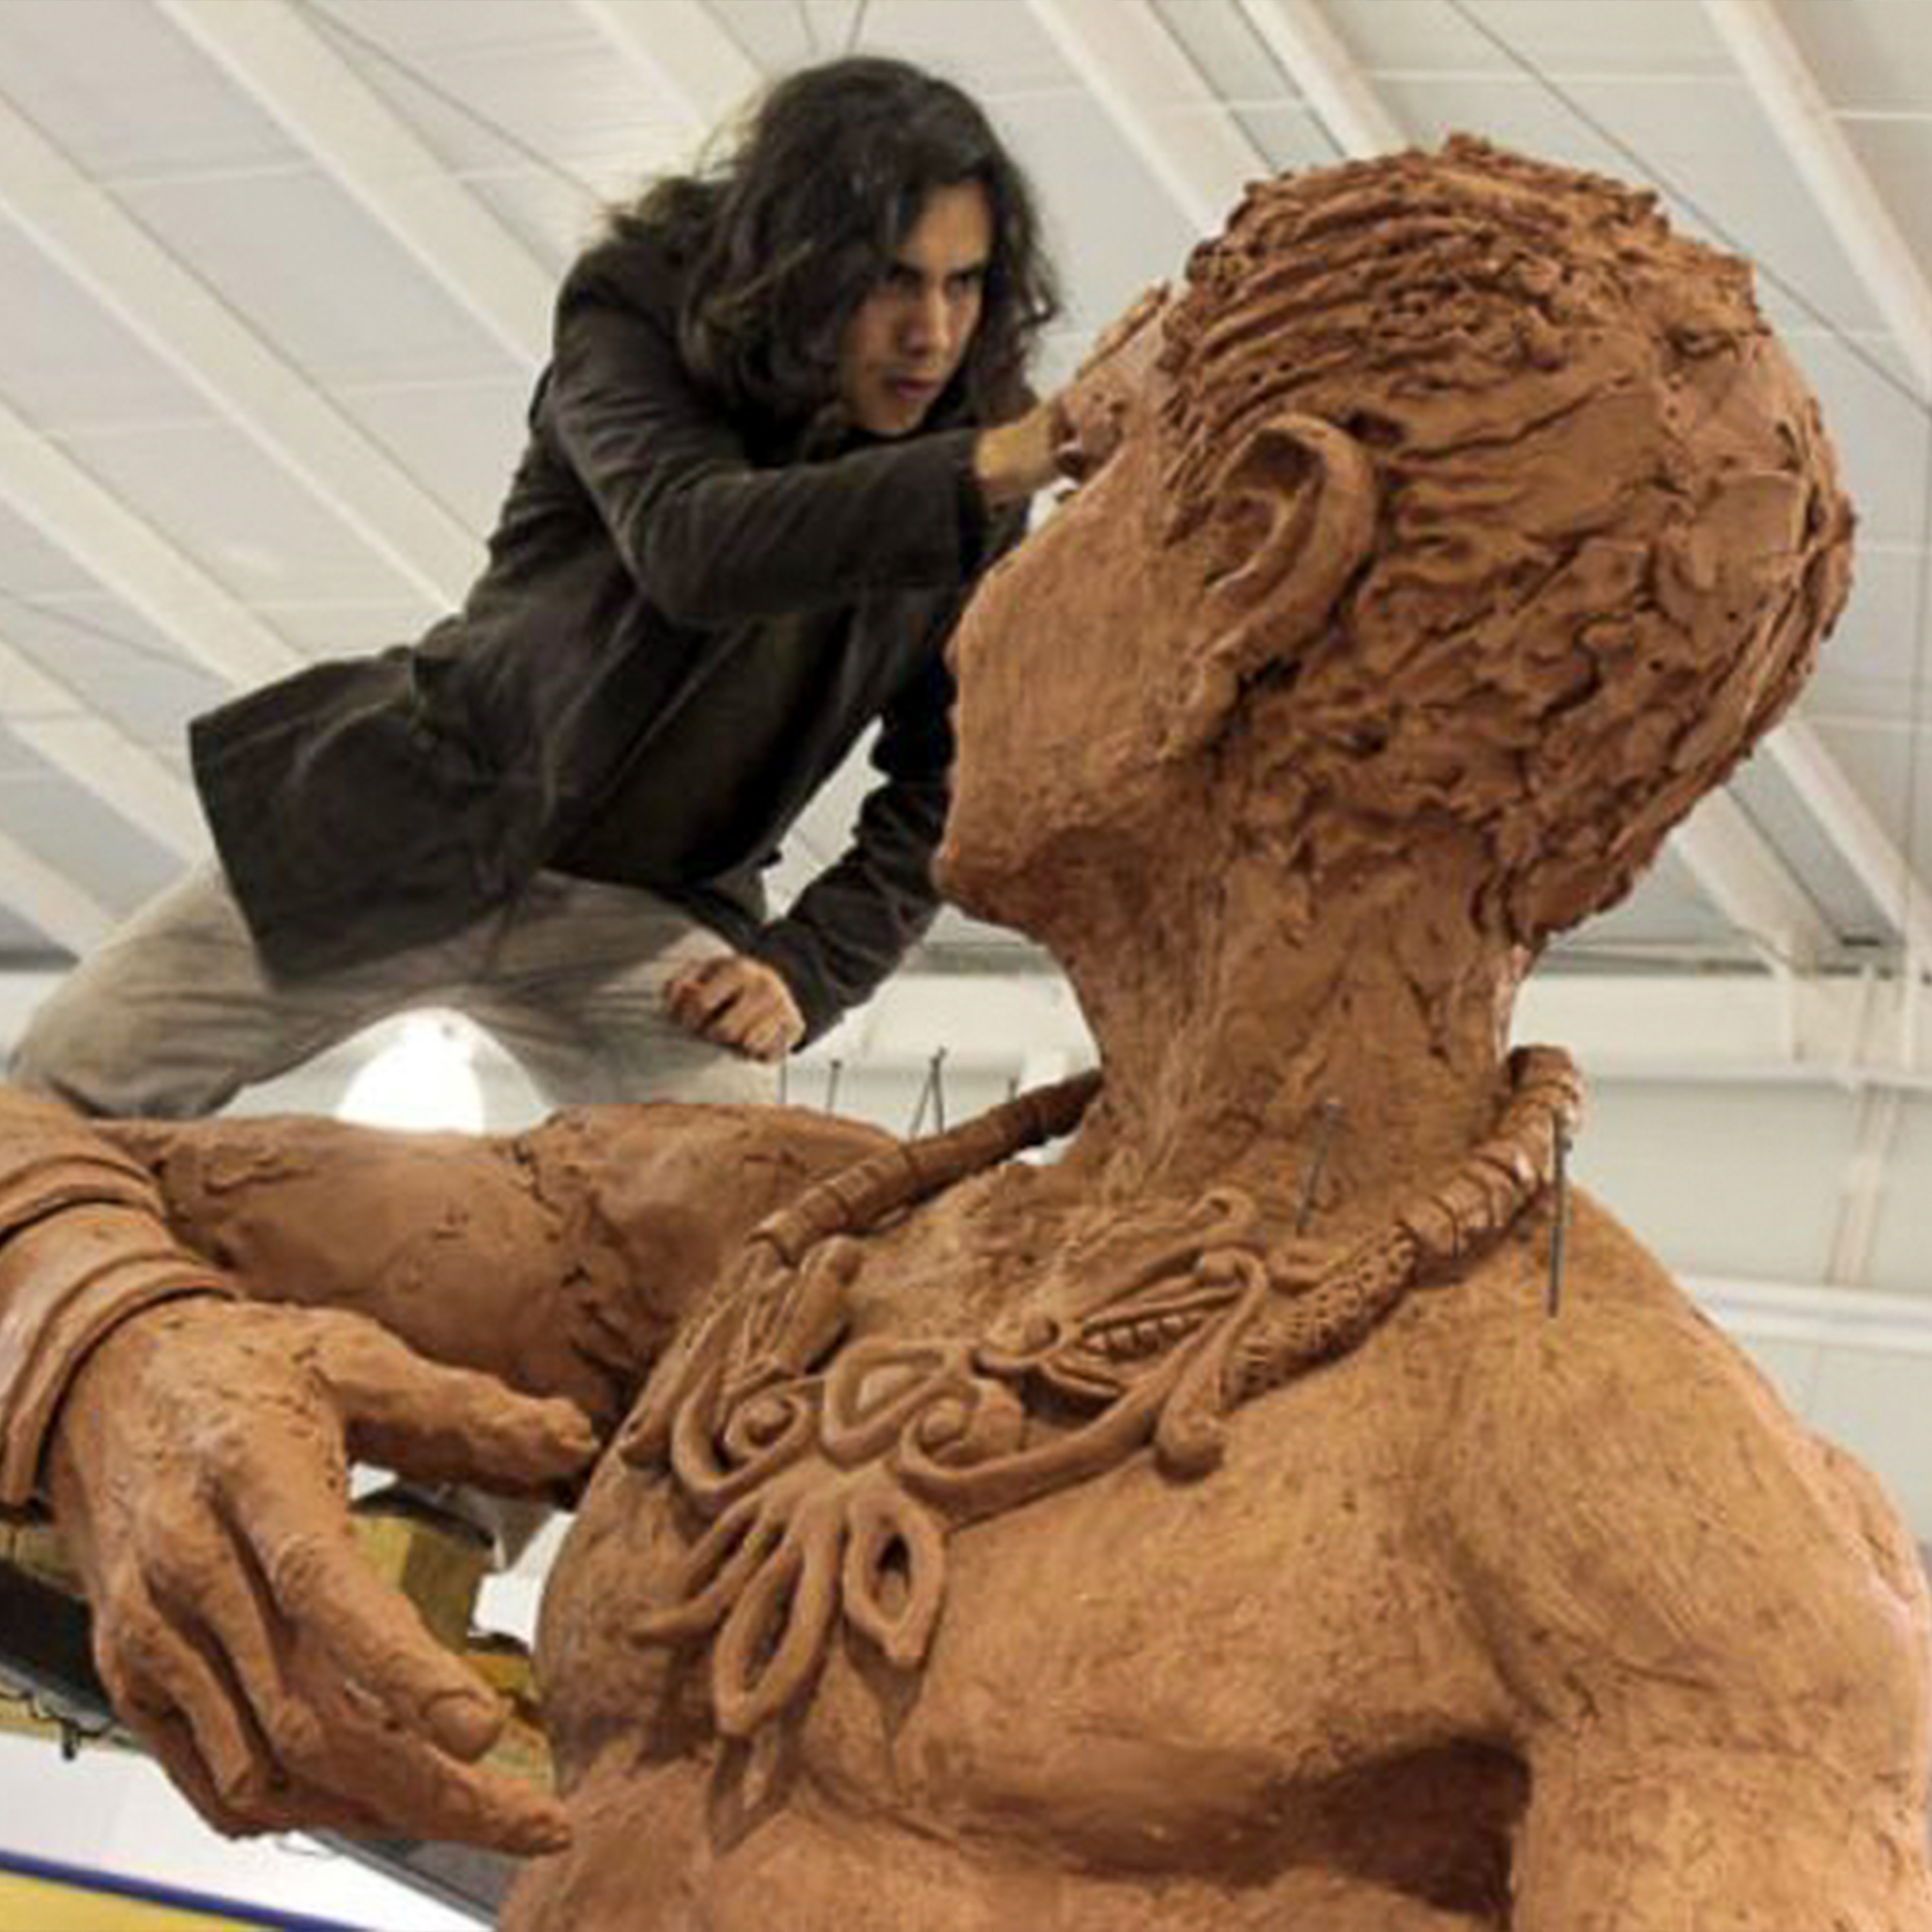 Artist David Manzanares Works On The Head Of A Large Figure Sculpture Square